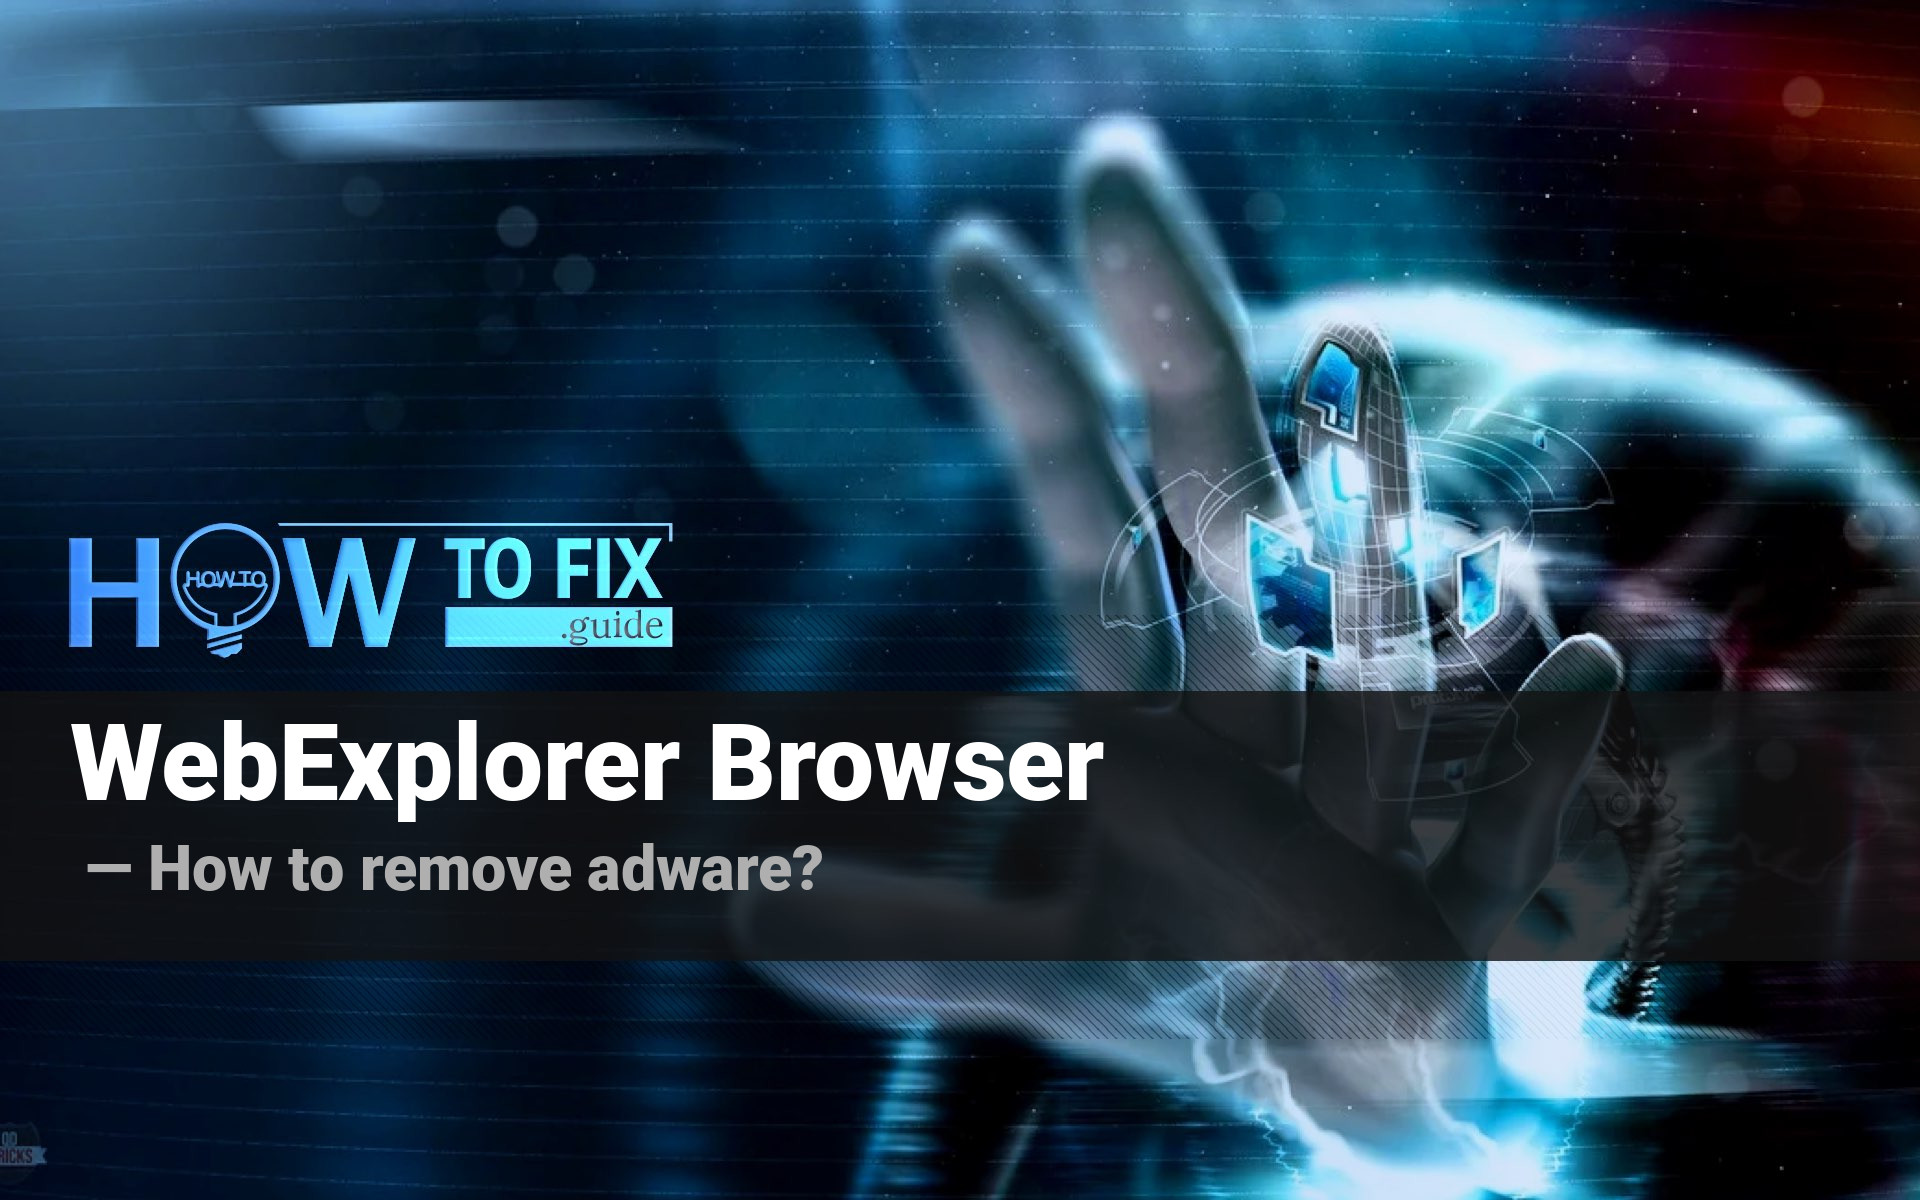 How to remove WebExplorer Browser?